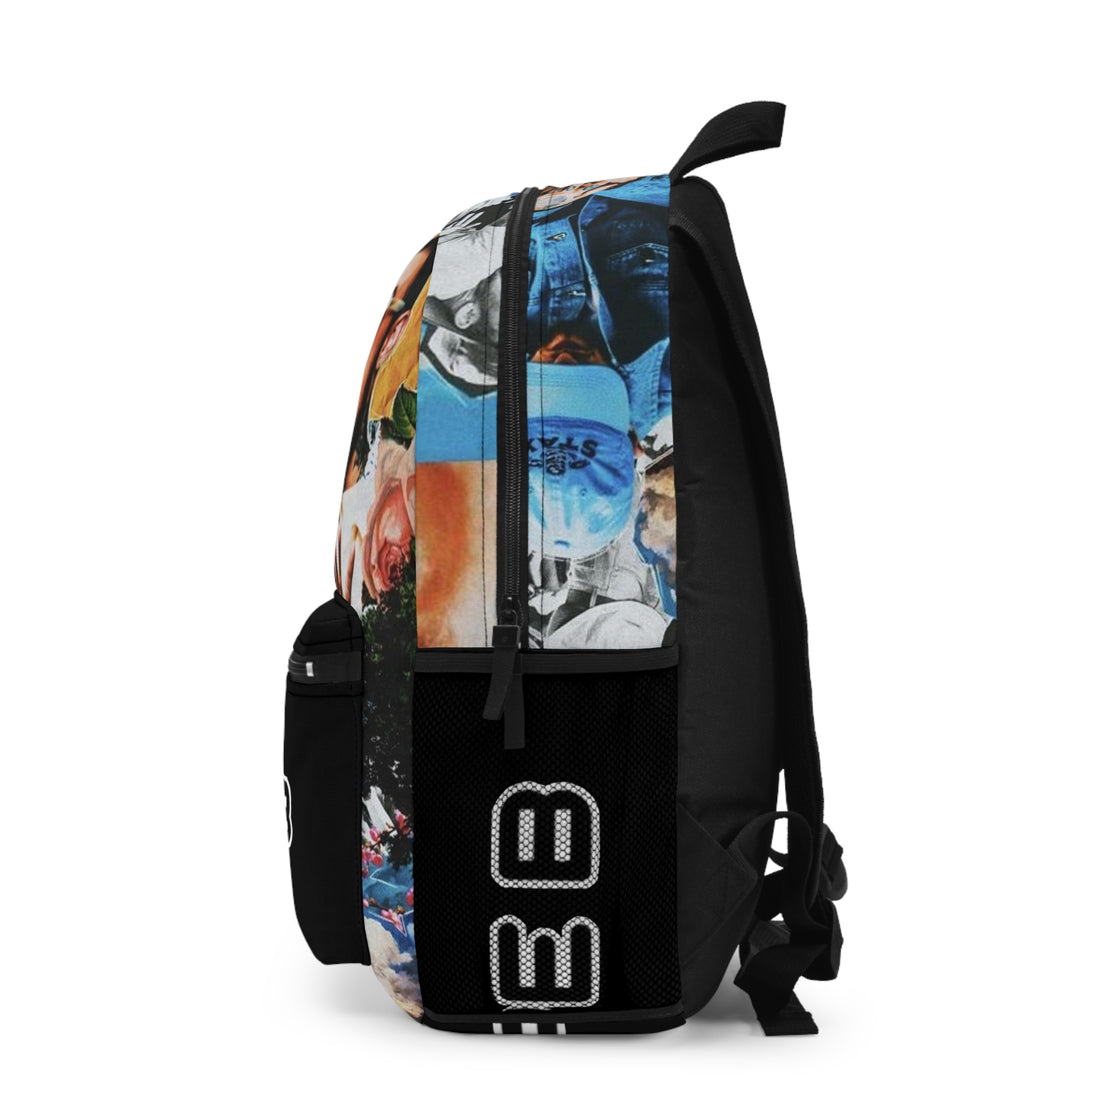 Tape B Backpack Marching Jersey